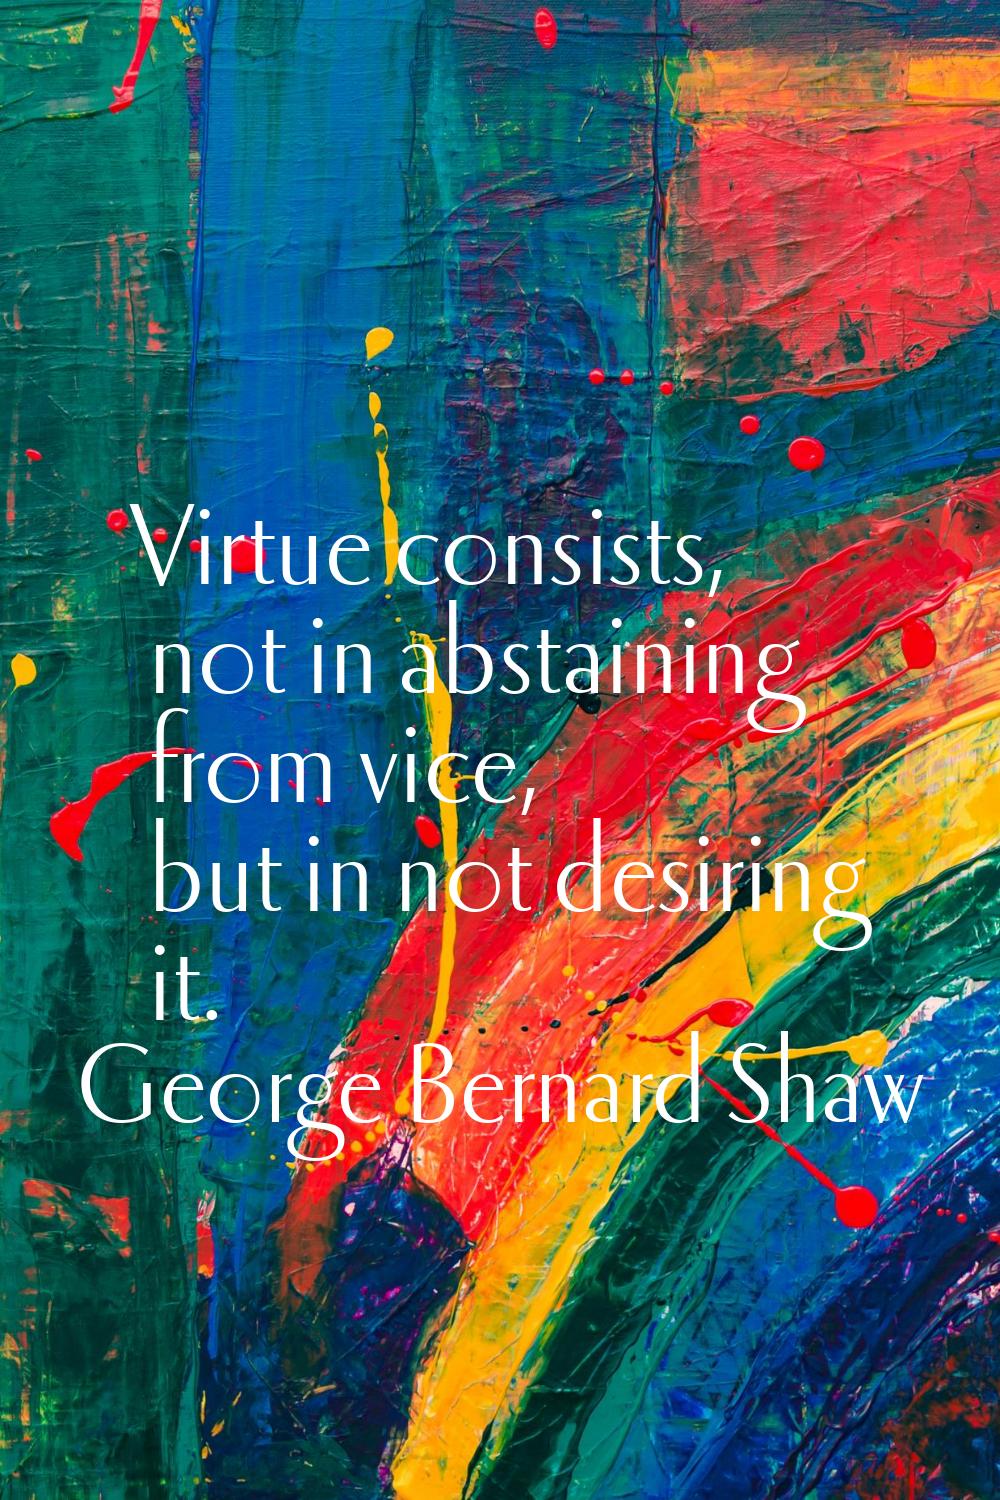 Virtue consists, not in abstaining from vice, but in not desiring it.